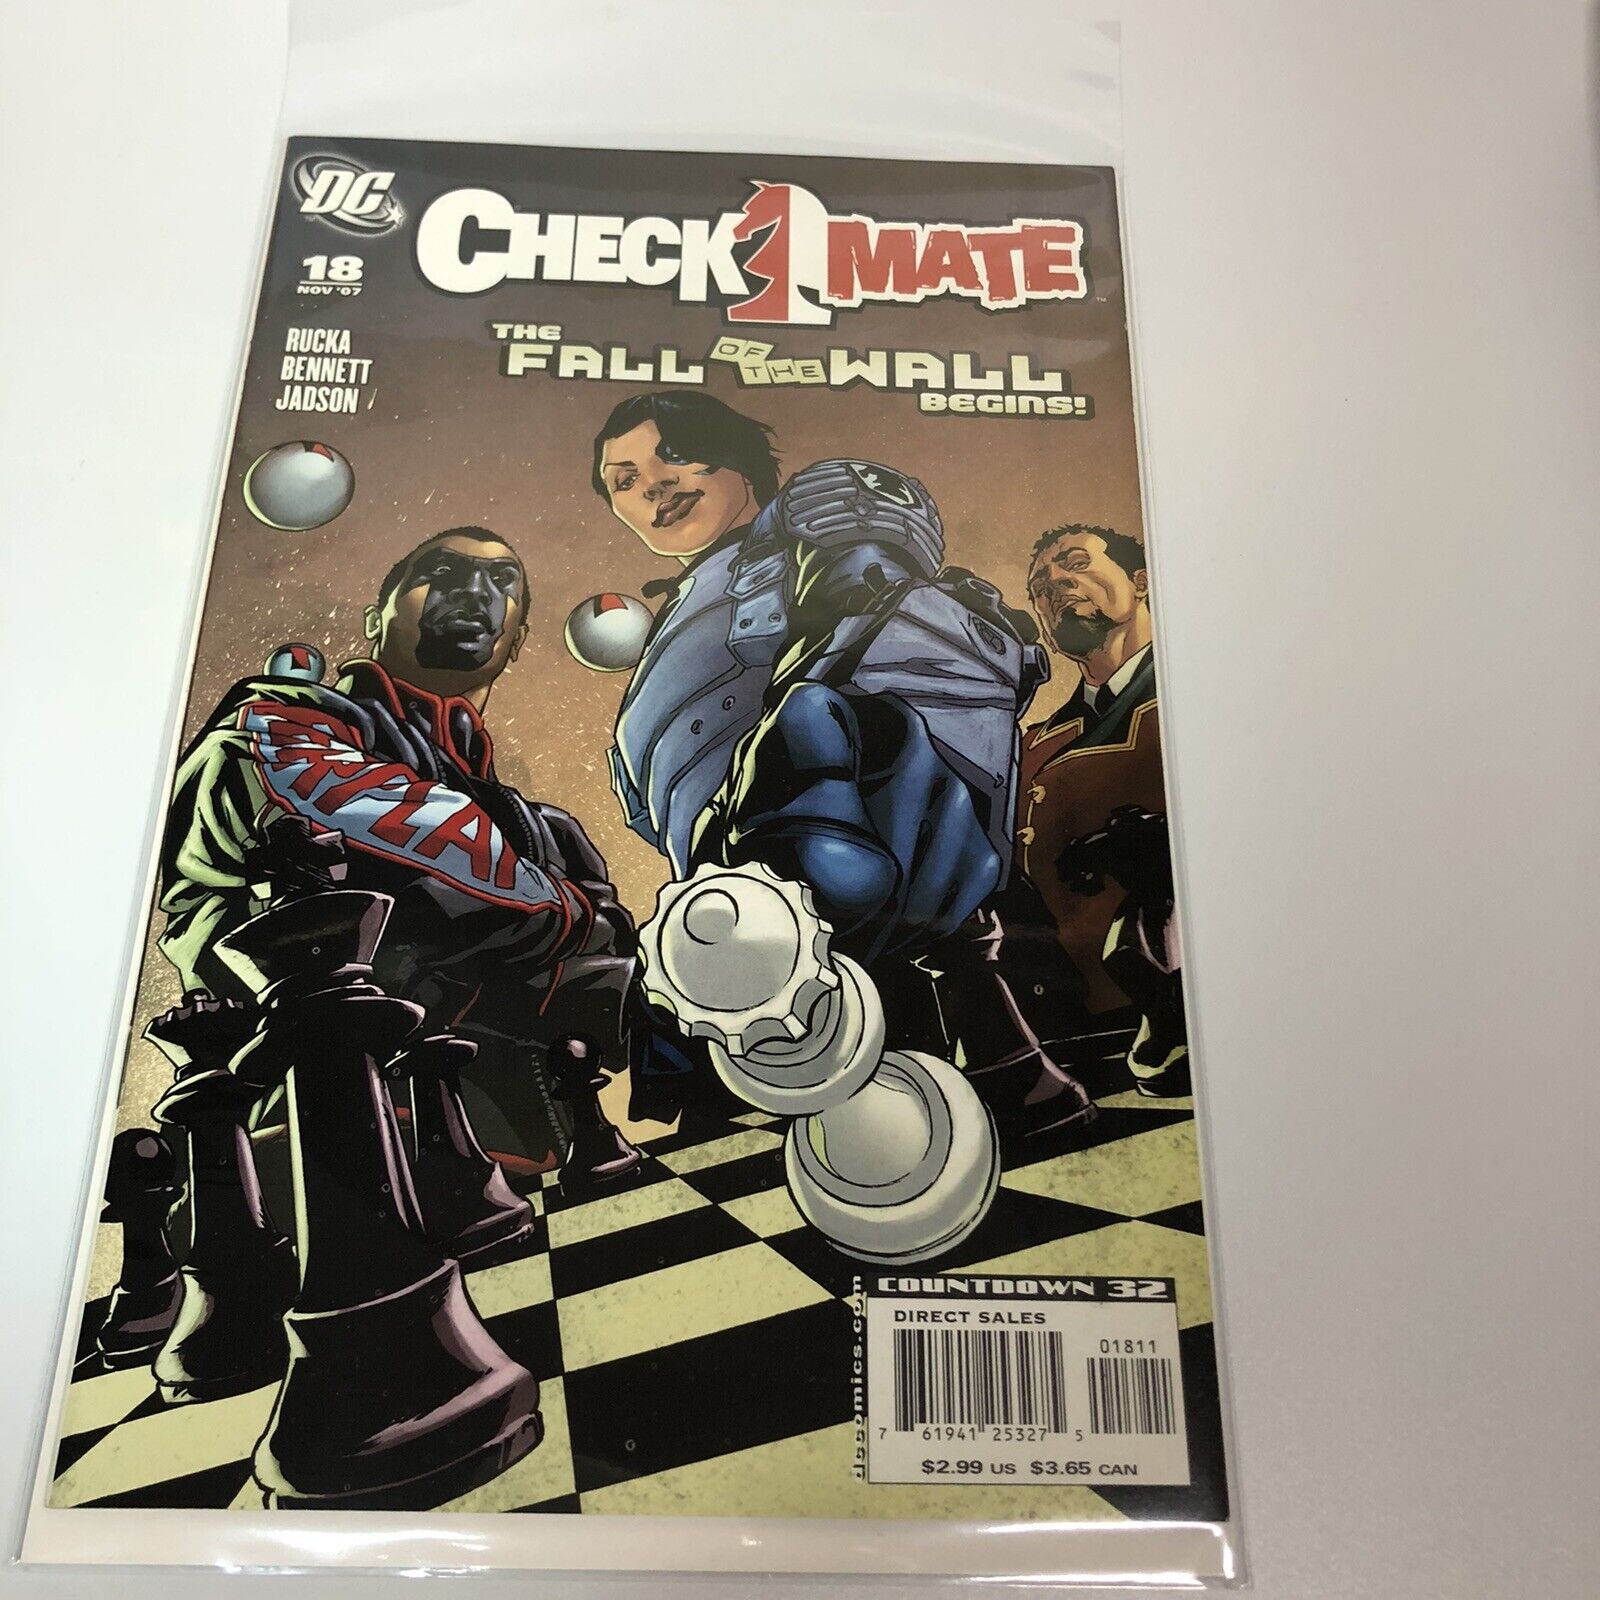 Checkmate TP Vol 03 The Fall Of The Wall -DC Comics- Rucka, Bennett, Jadson